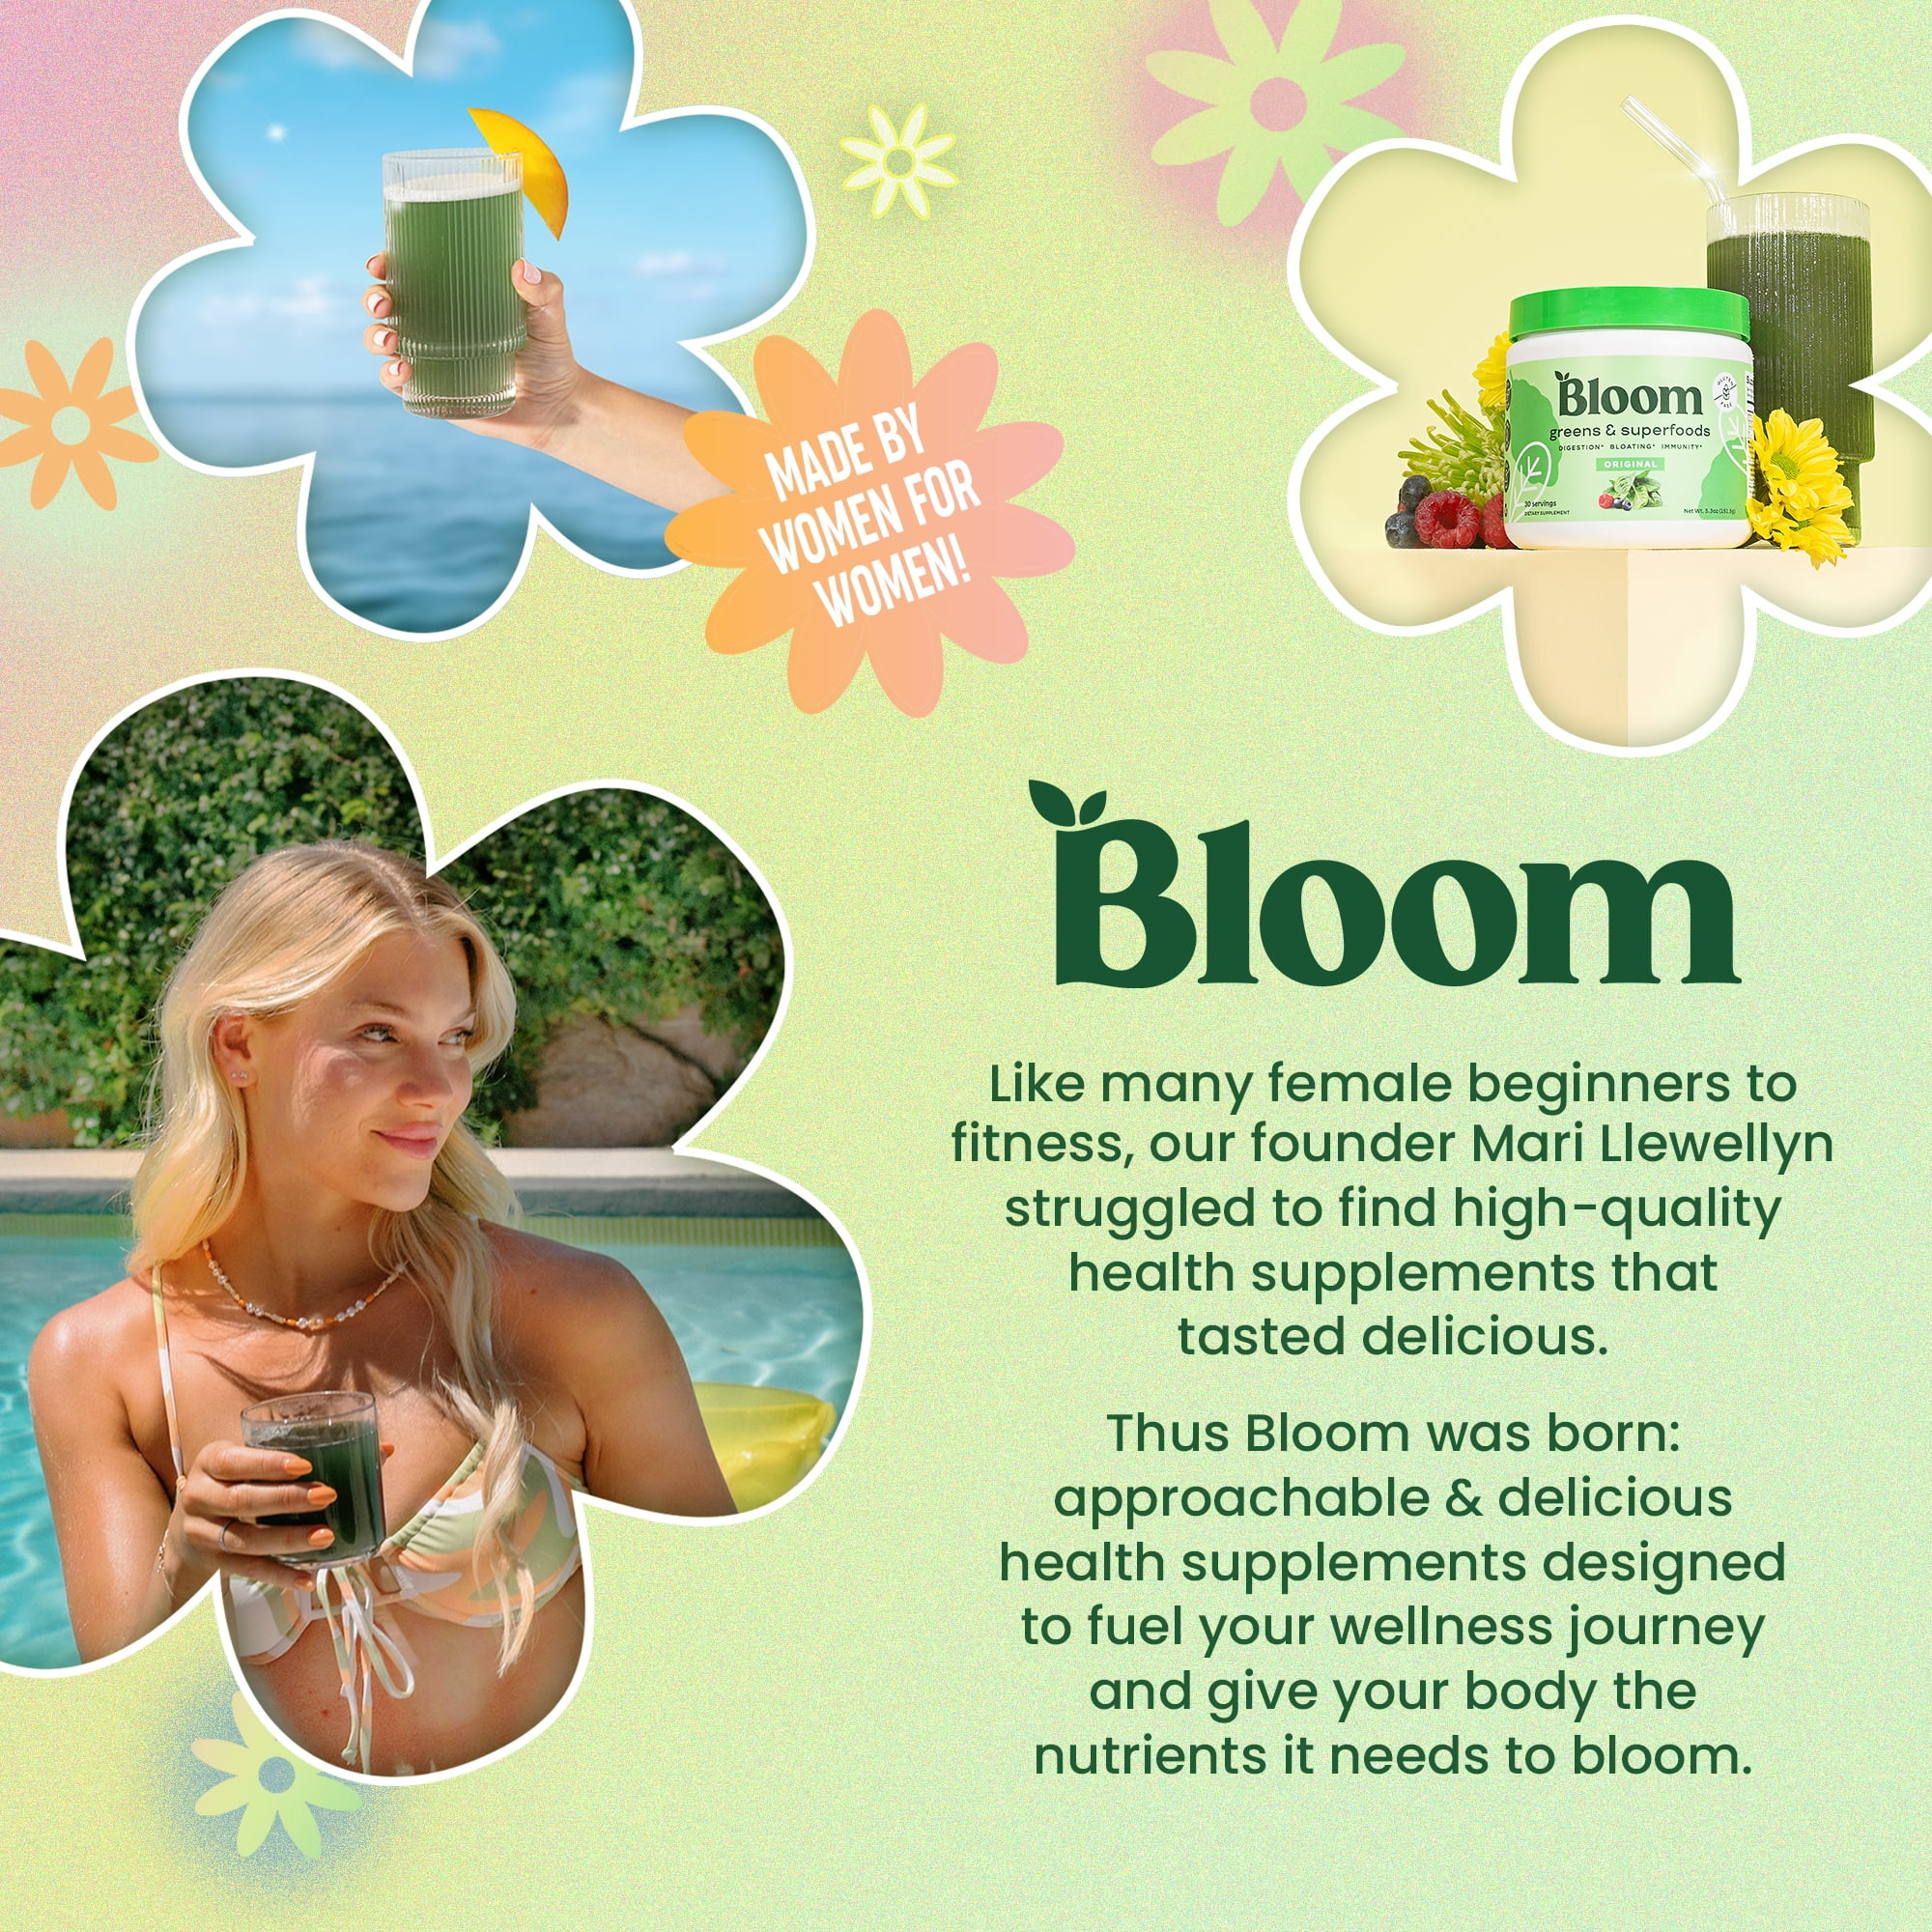 Bloom Nutrition Greens & Superfoods Powder - Truth in Advertising